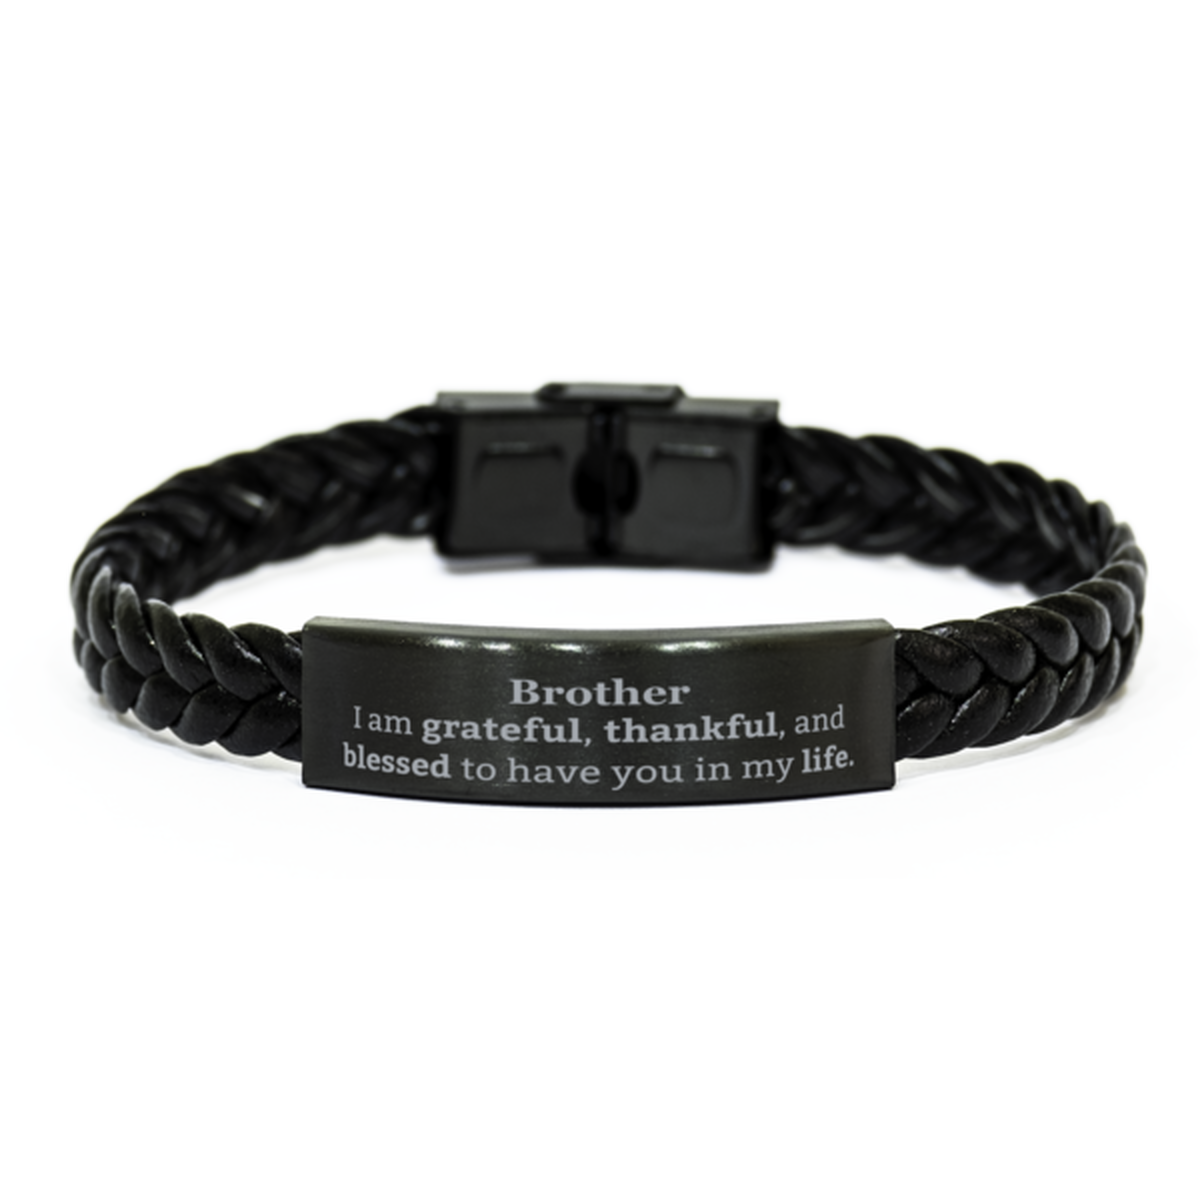 Brother Appreciation Gifts, I am grateful, thankful, and blessed, Thank You Braided Leather Bracelet for Brother, Birthday Inspiration Gifts for Brother